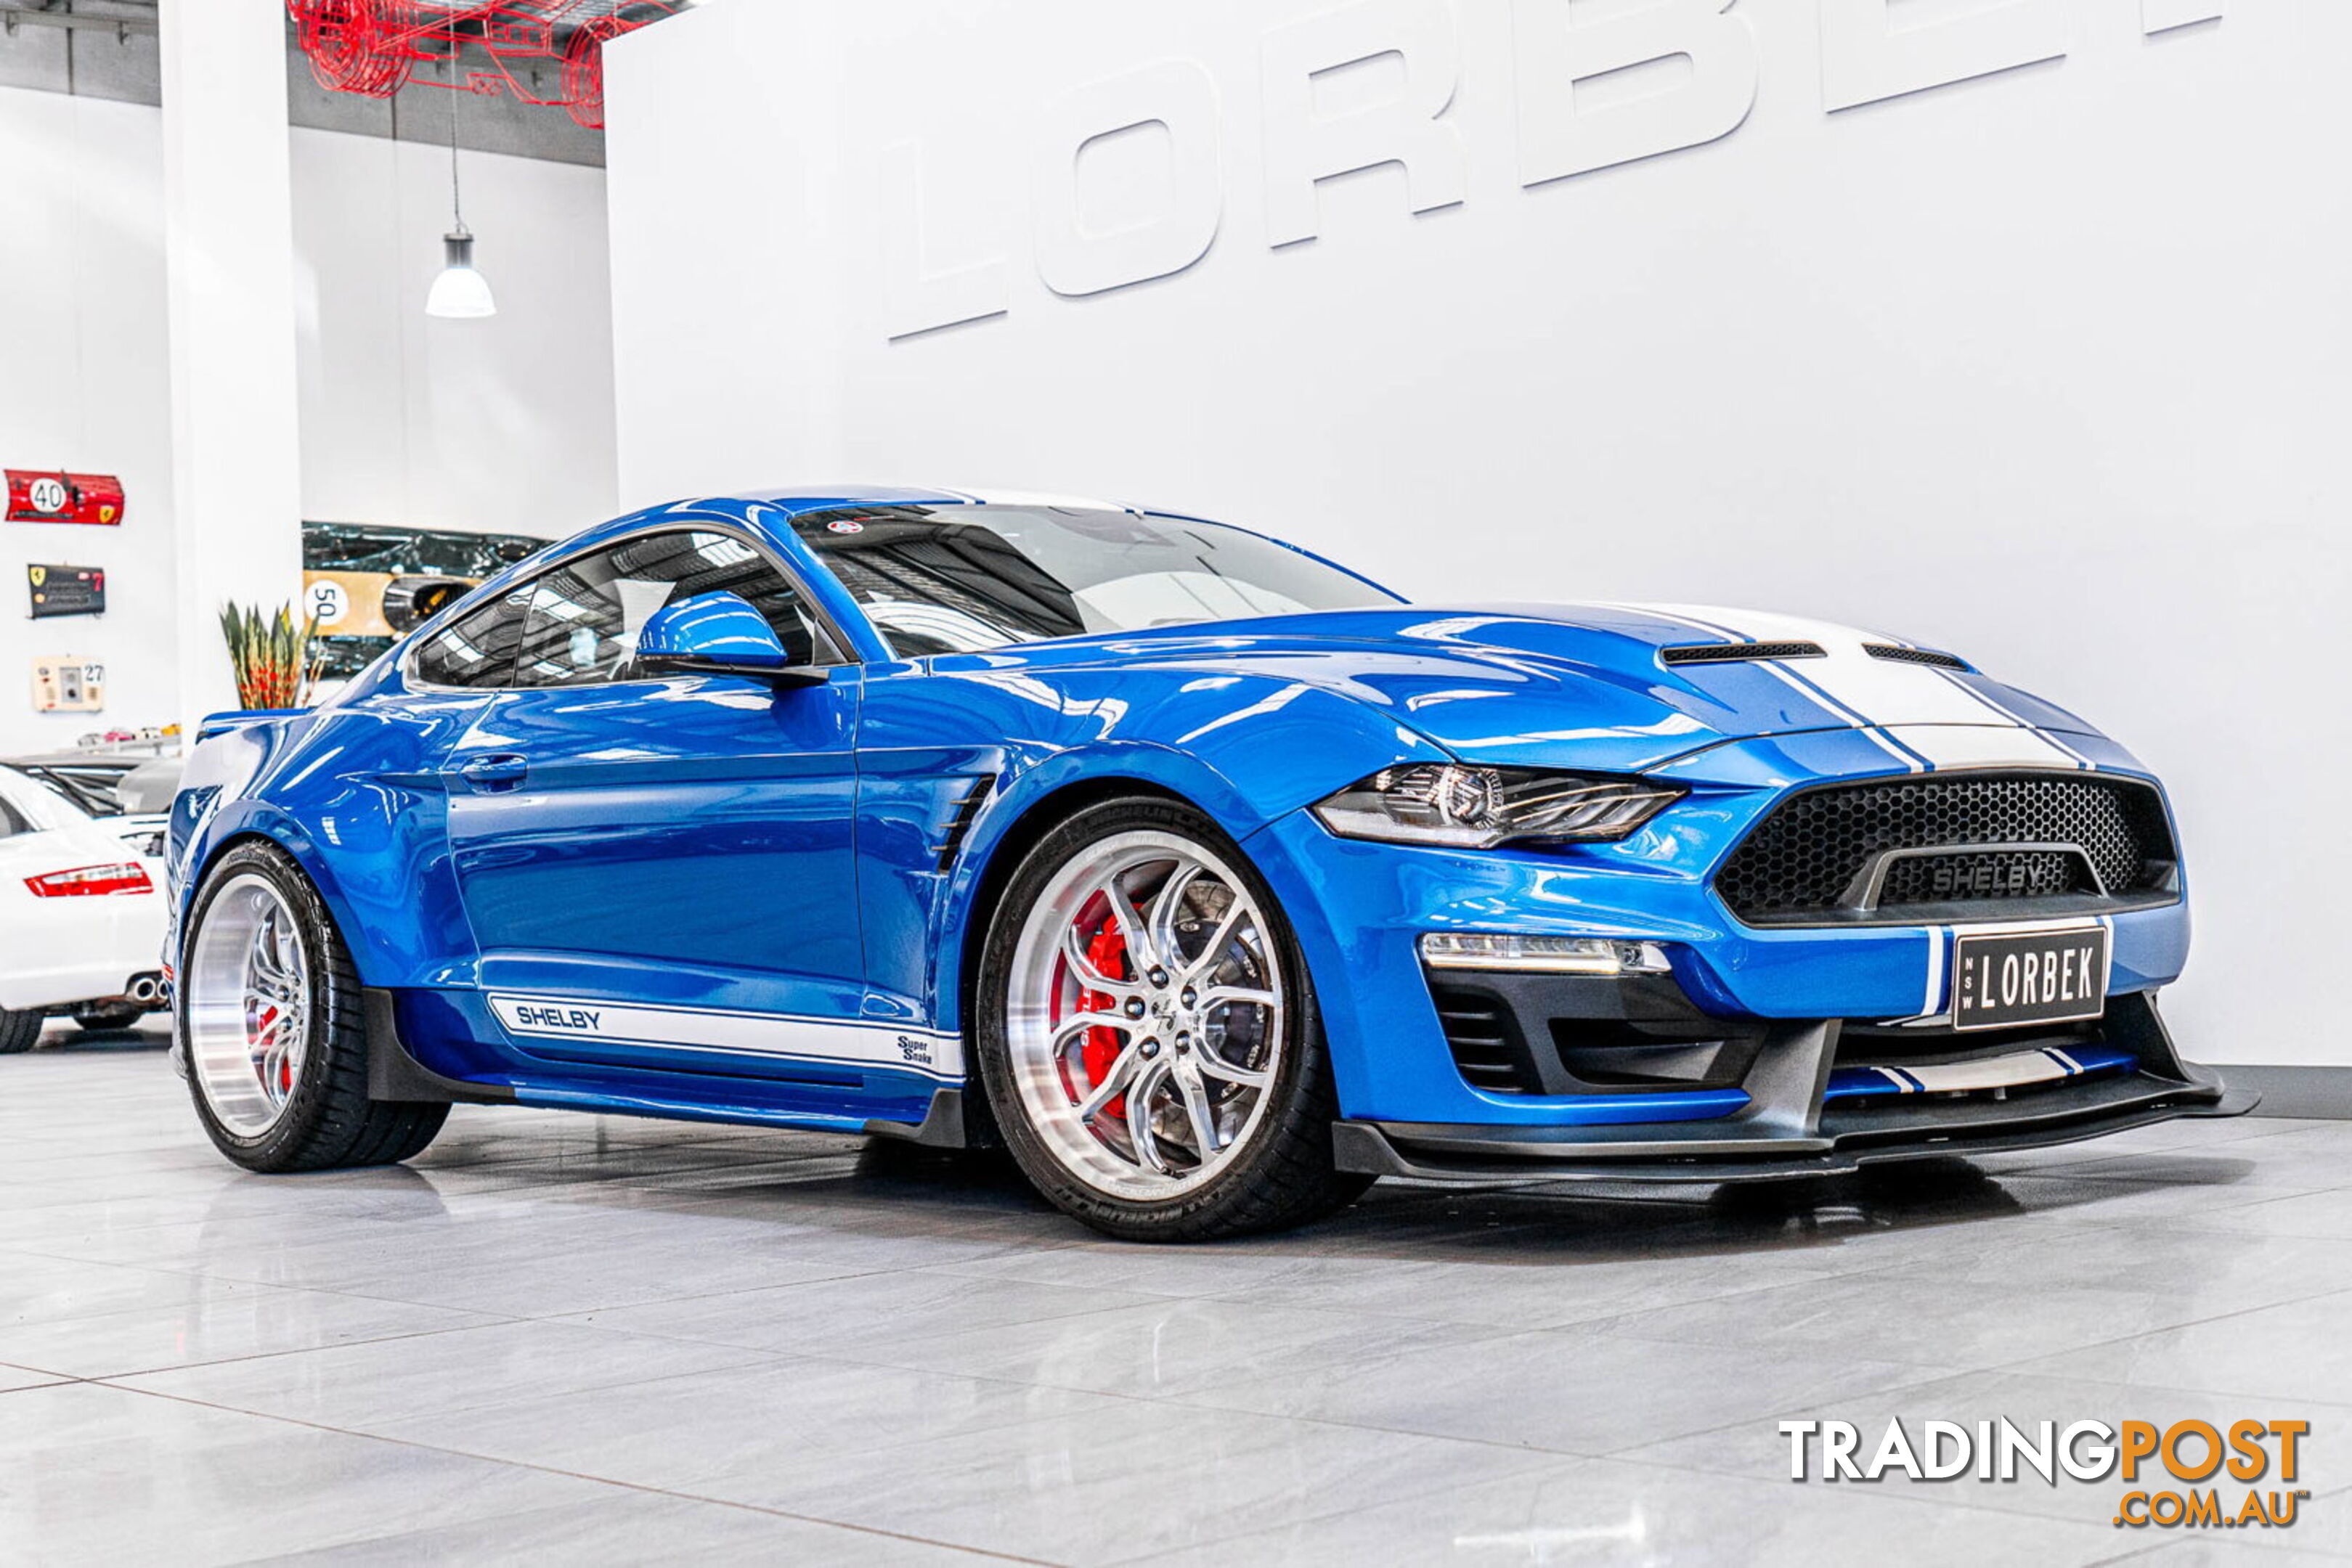 2019 Ford Mustang Shelby Supersnake WIDEBODY FN